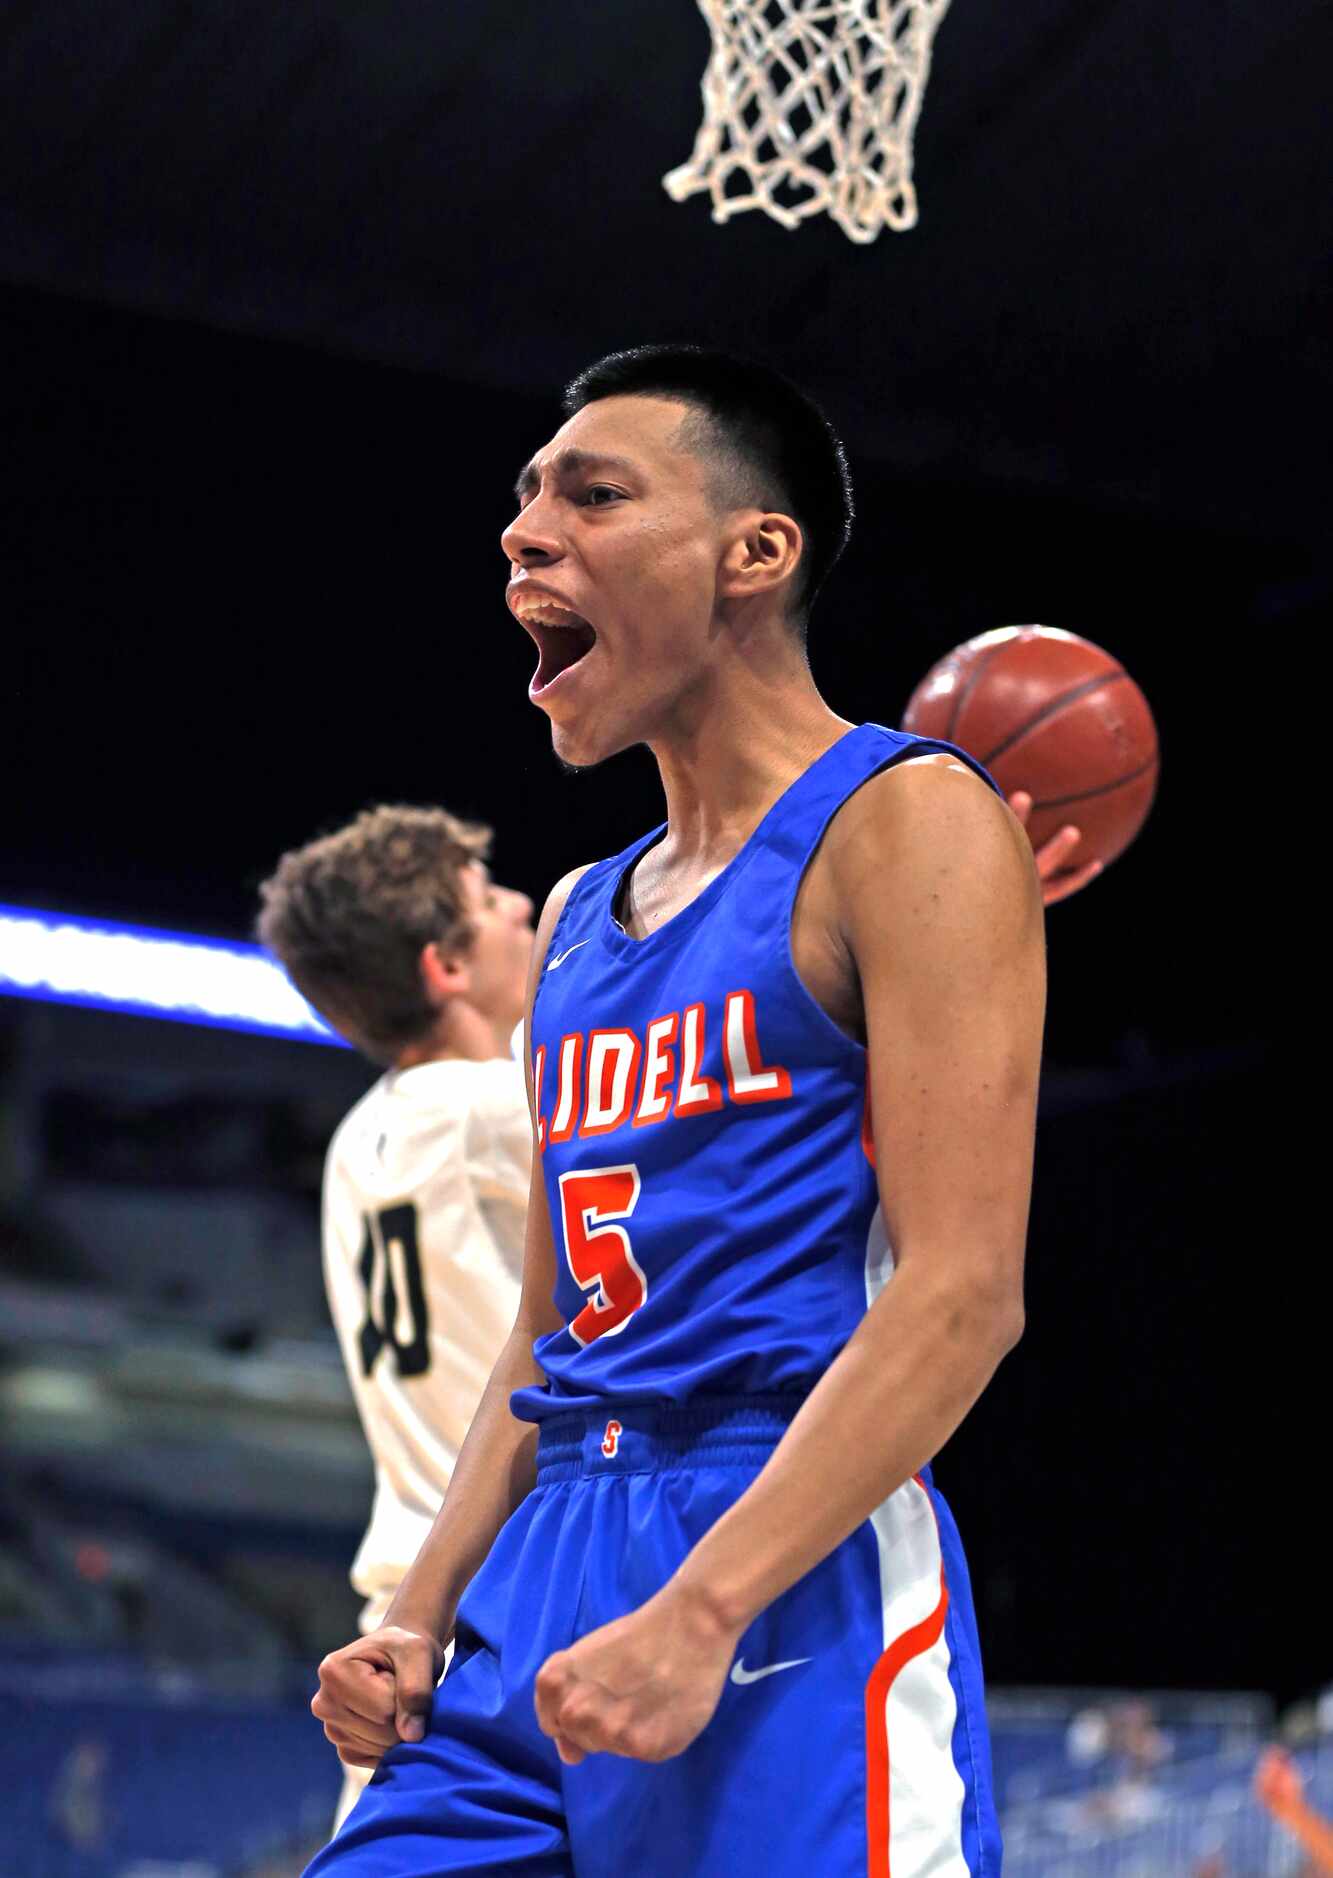 Slidell guard Humberto Hernandez #5 reacts after scoring. Slidell defeated Jayton 45-28 in a...